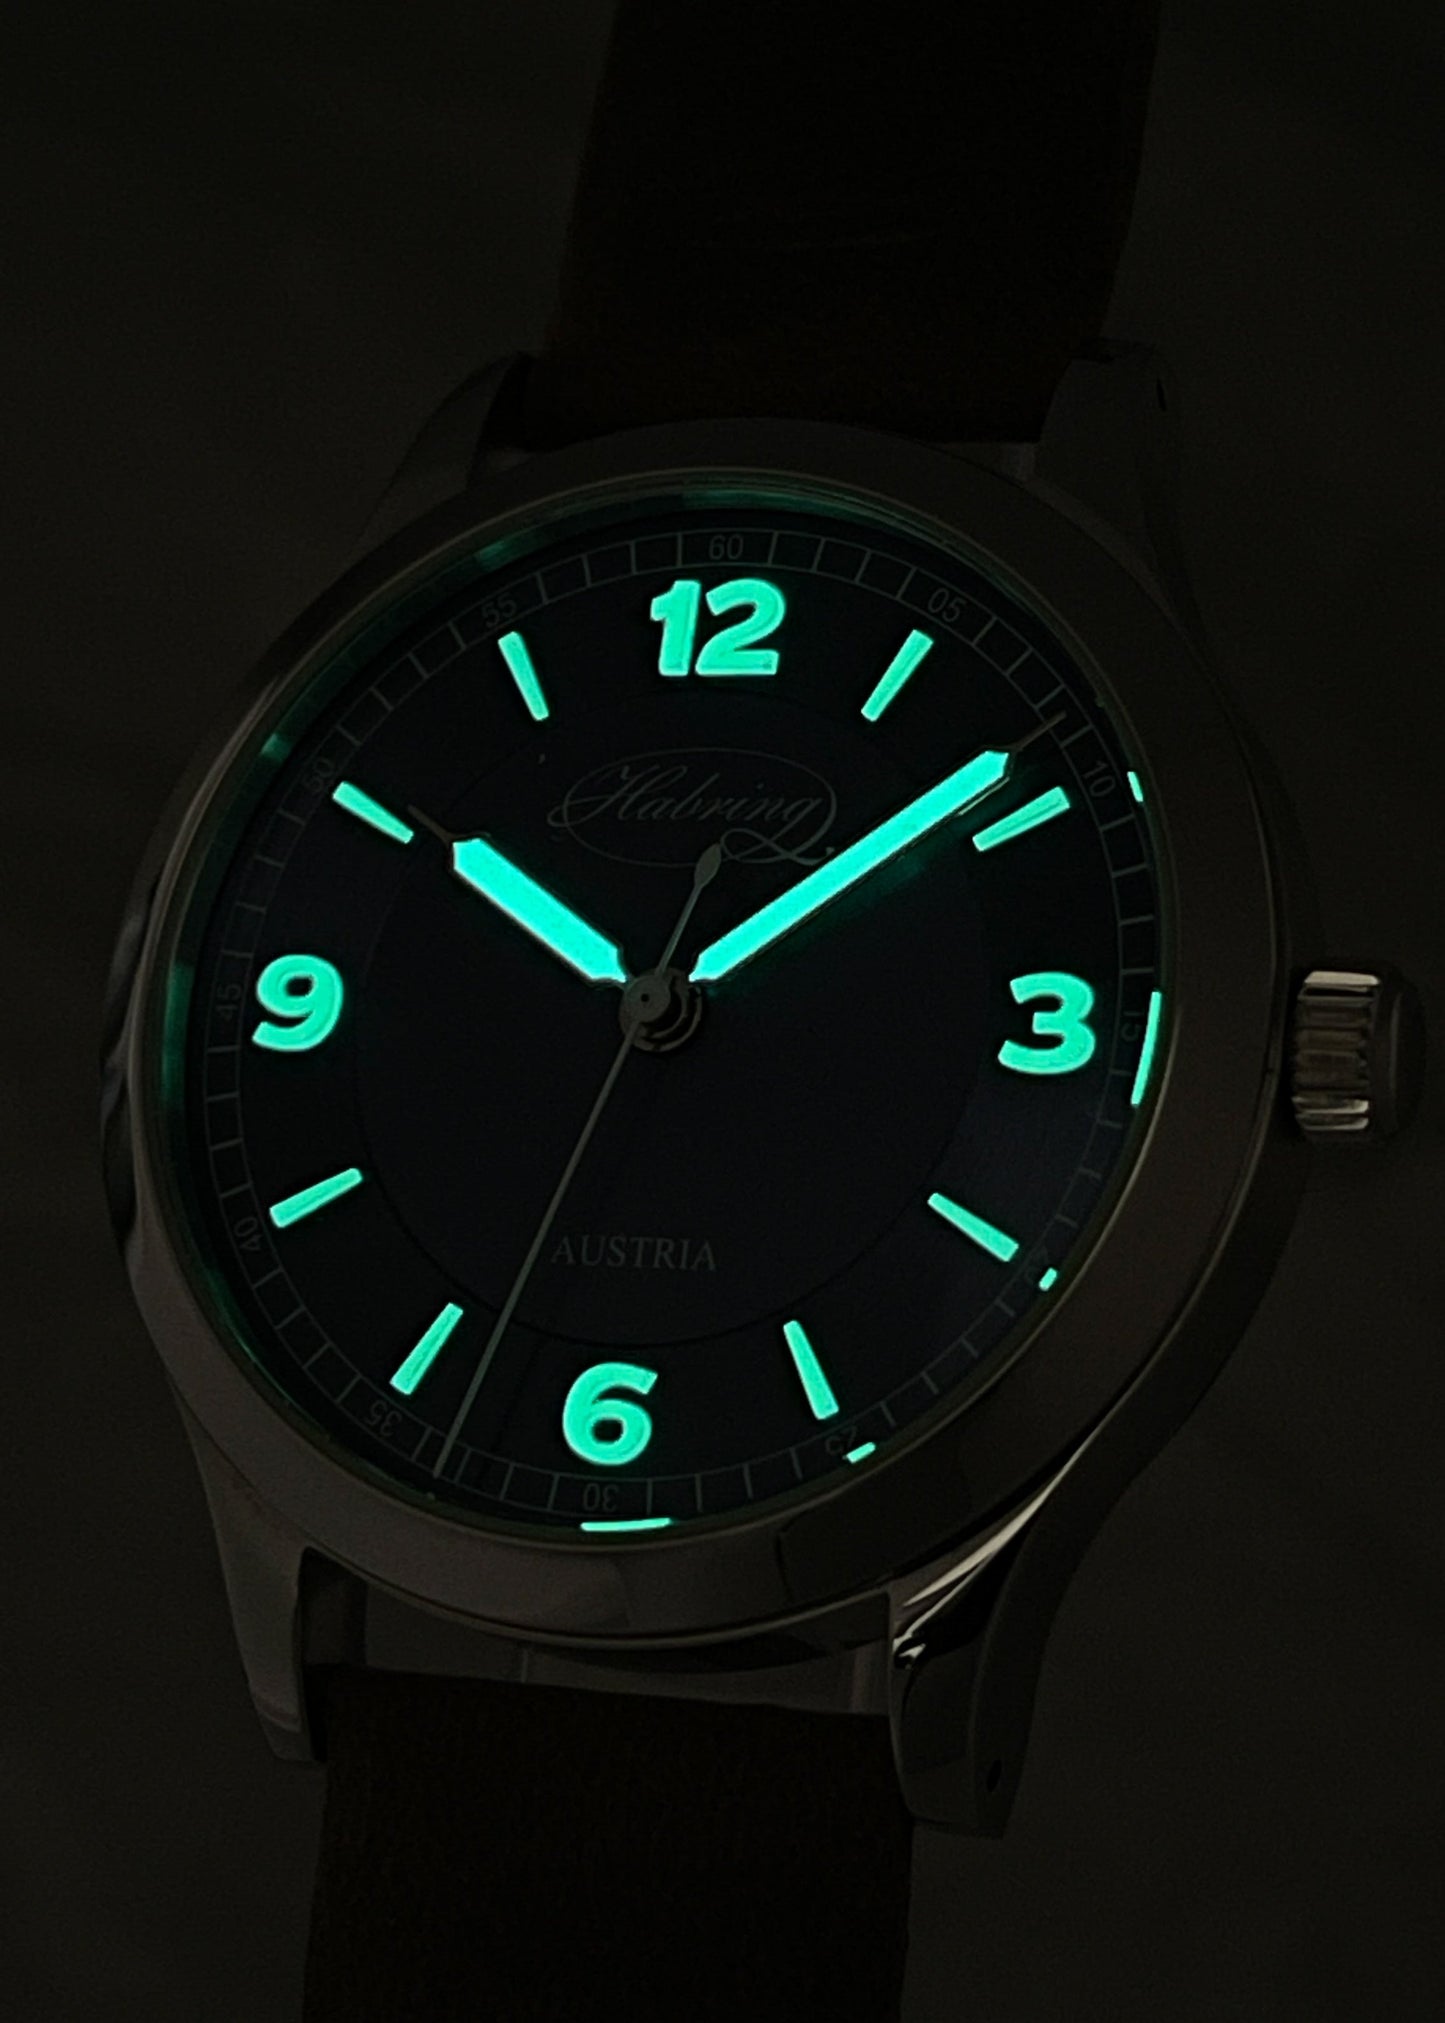 Habring² x Horology By The Sea Grand Erwin Special Edition - Serial #5/15 (IN STOCK)